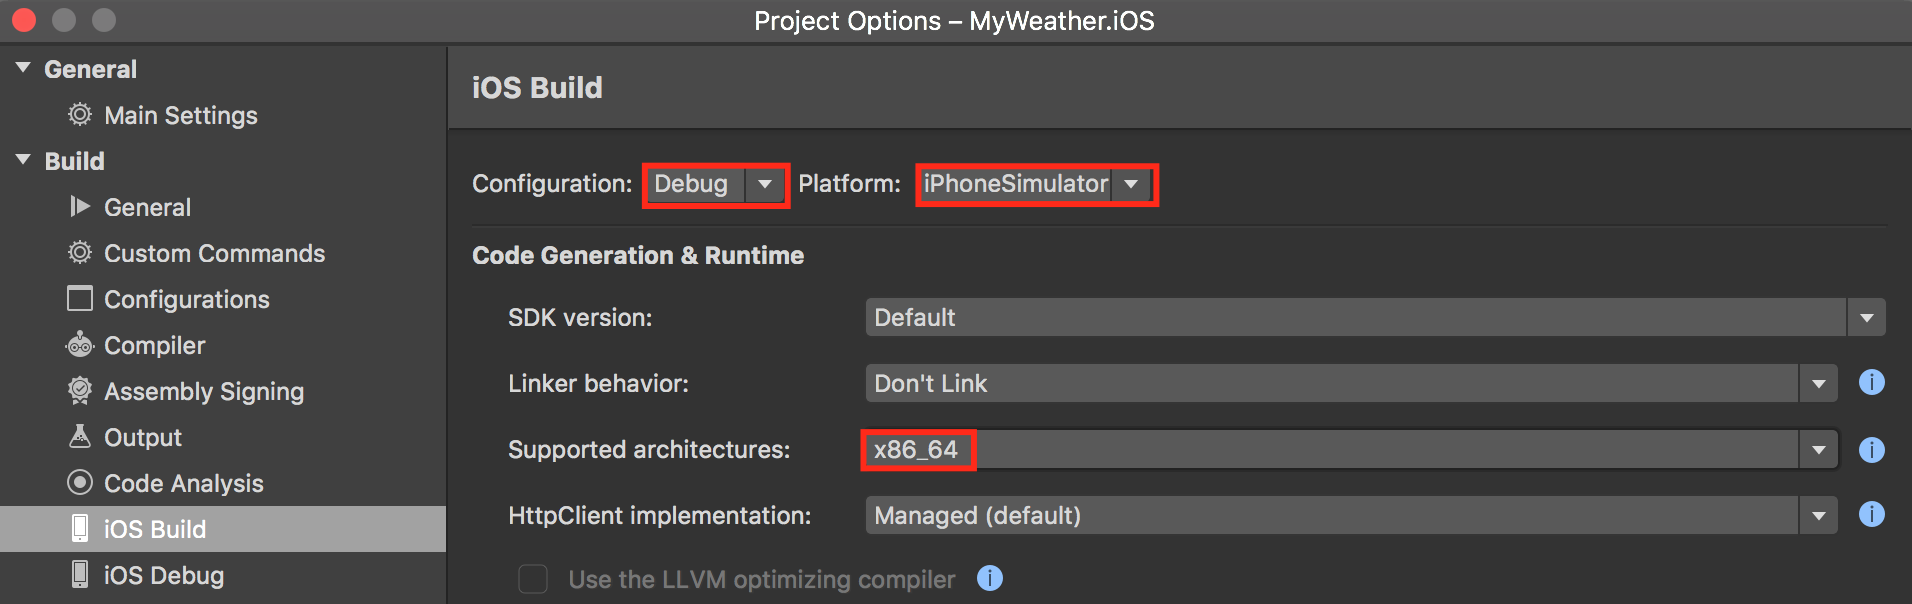 Set x86_64 in Supported Architectures for iPhoneSimulator configuration in Xamarin.iOS application